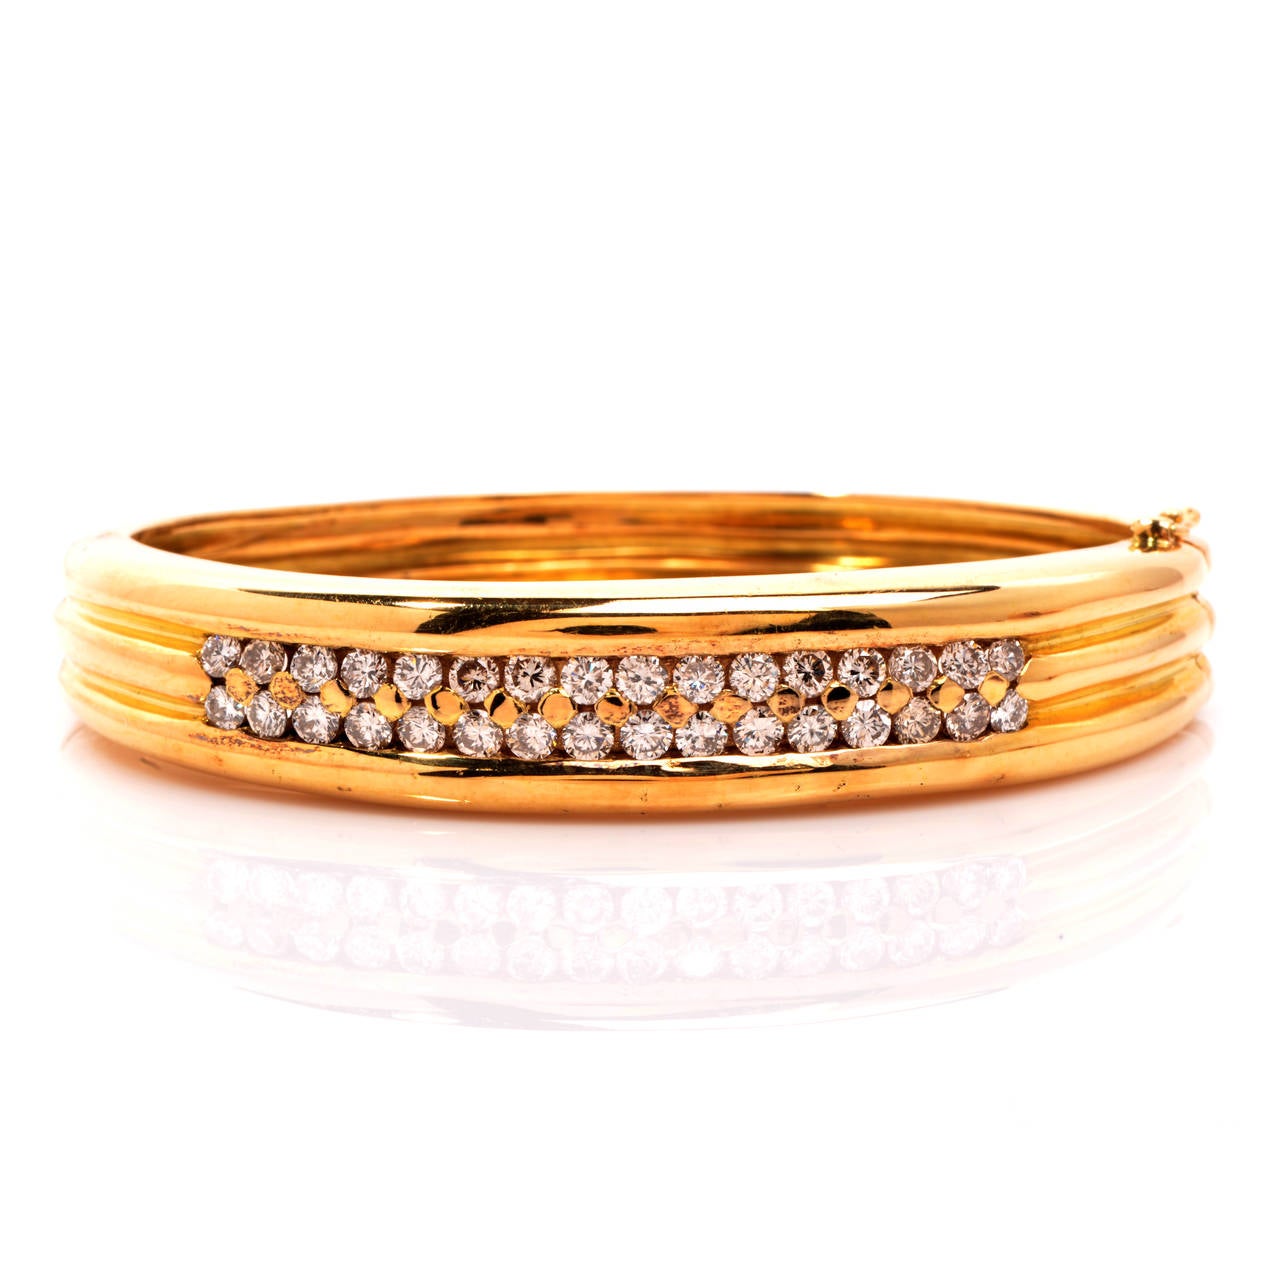 this Italian diamond bangle bracelet with elegance and timeless classic, celebrating femininity and charm with its beautiful craftsmanship. Finely crafted in solid 18K yellow solid gold, this hinged bangle bracelet features a sparkling diamond